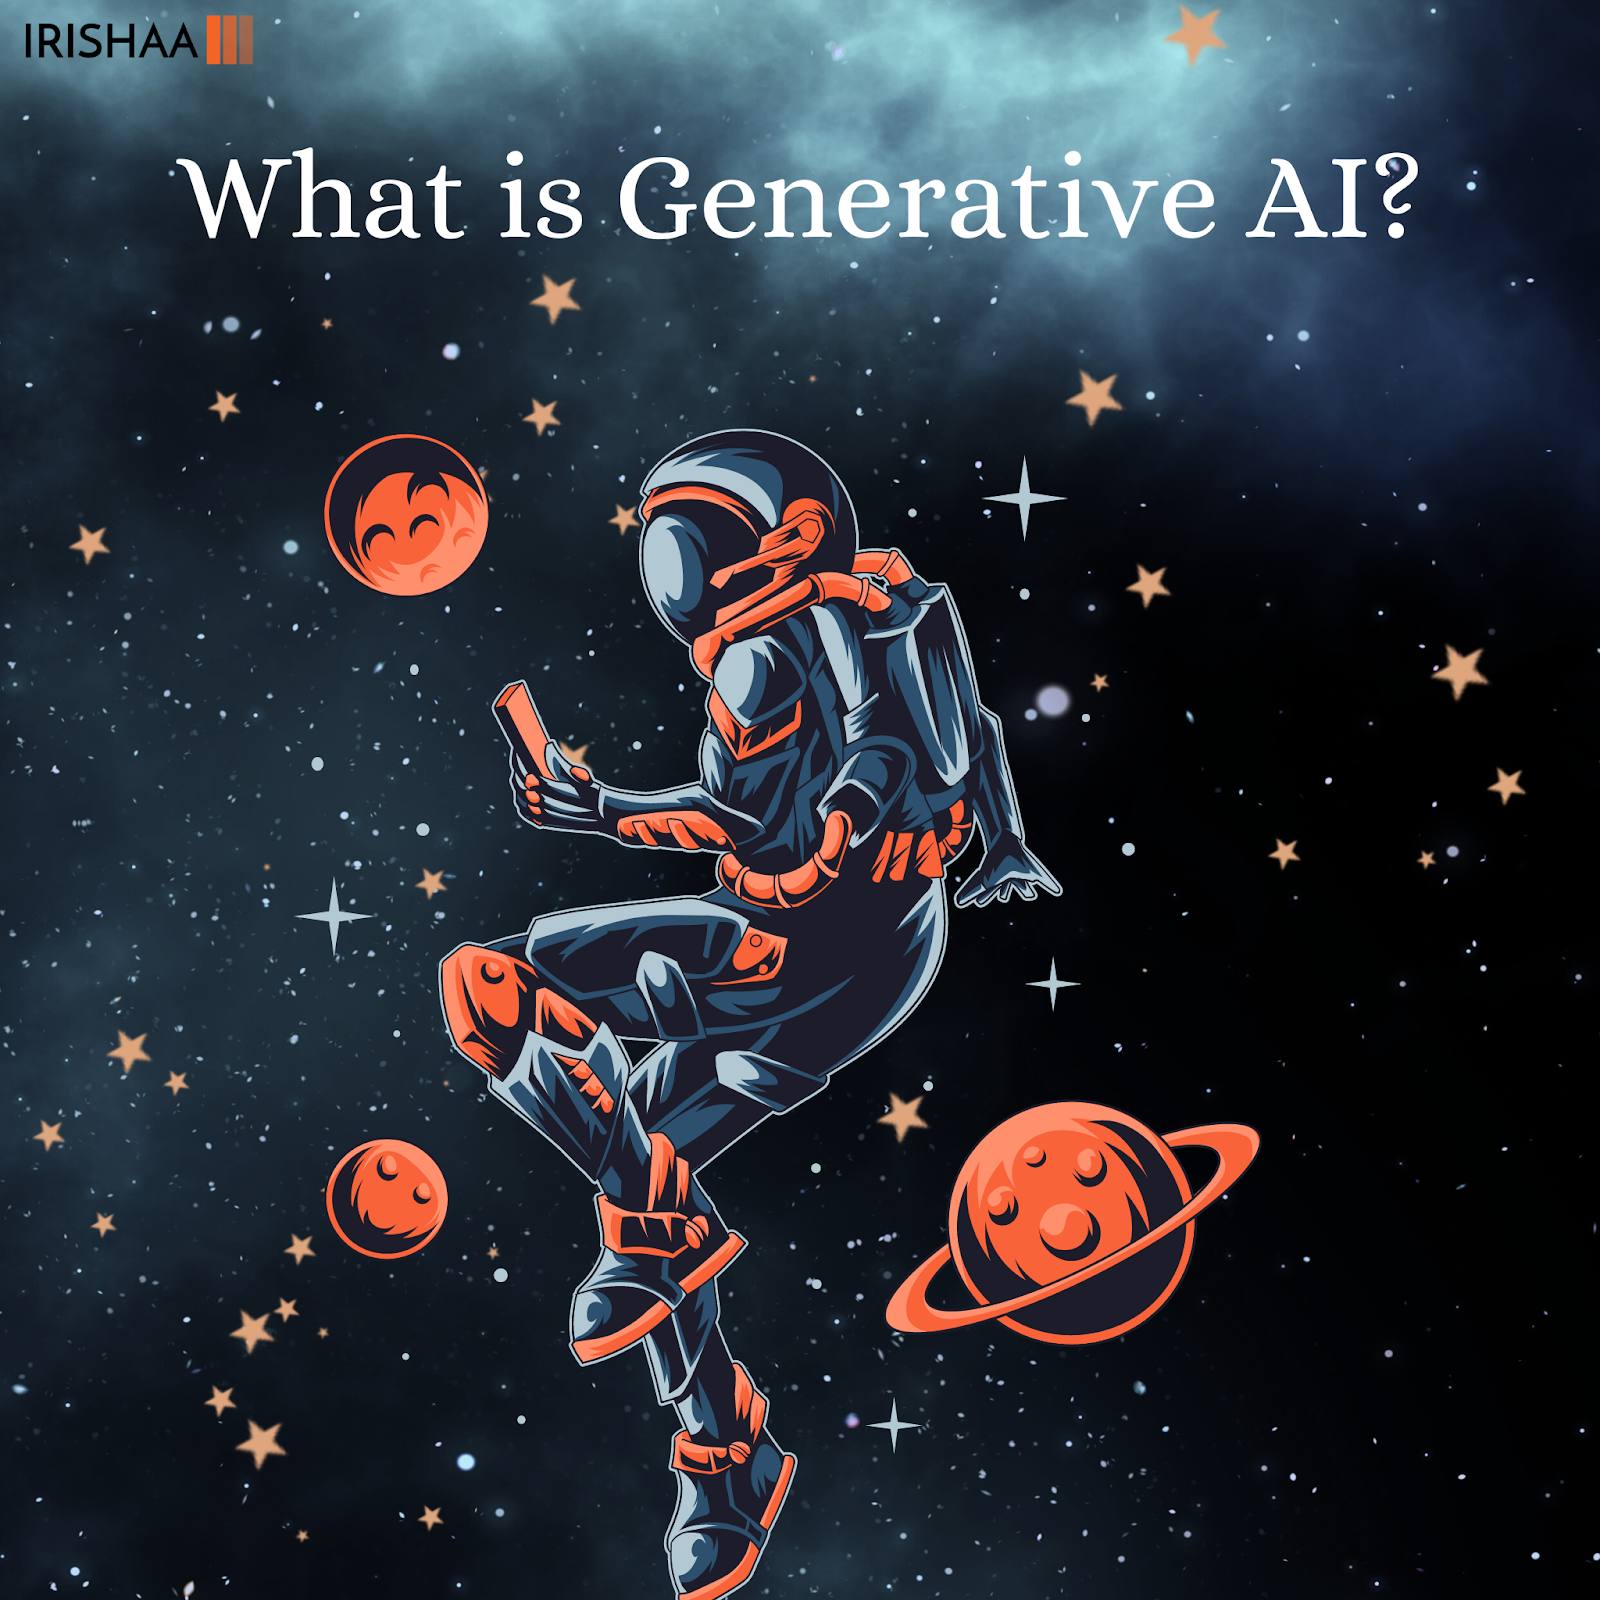 What is Generative AI?
